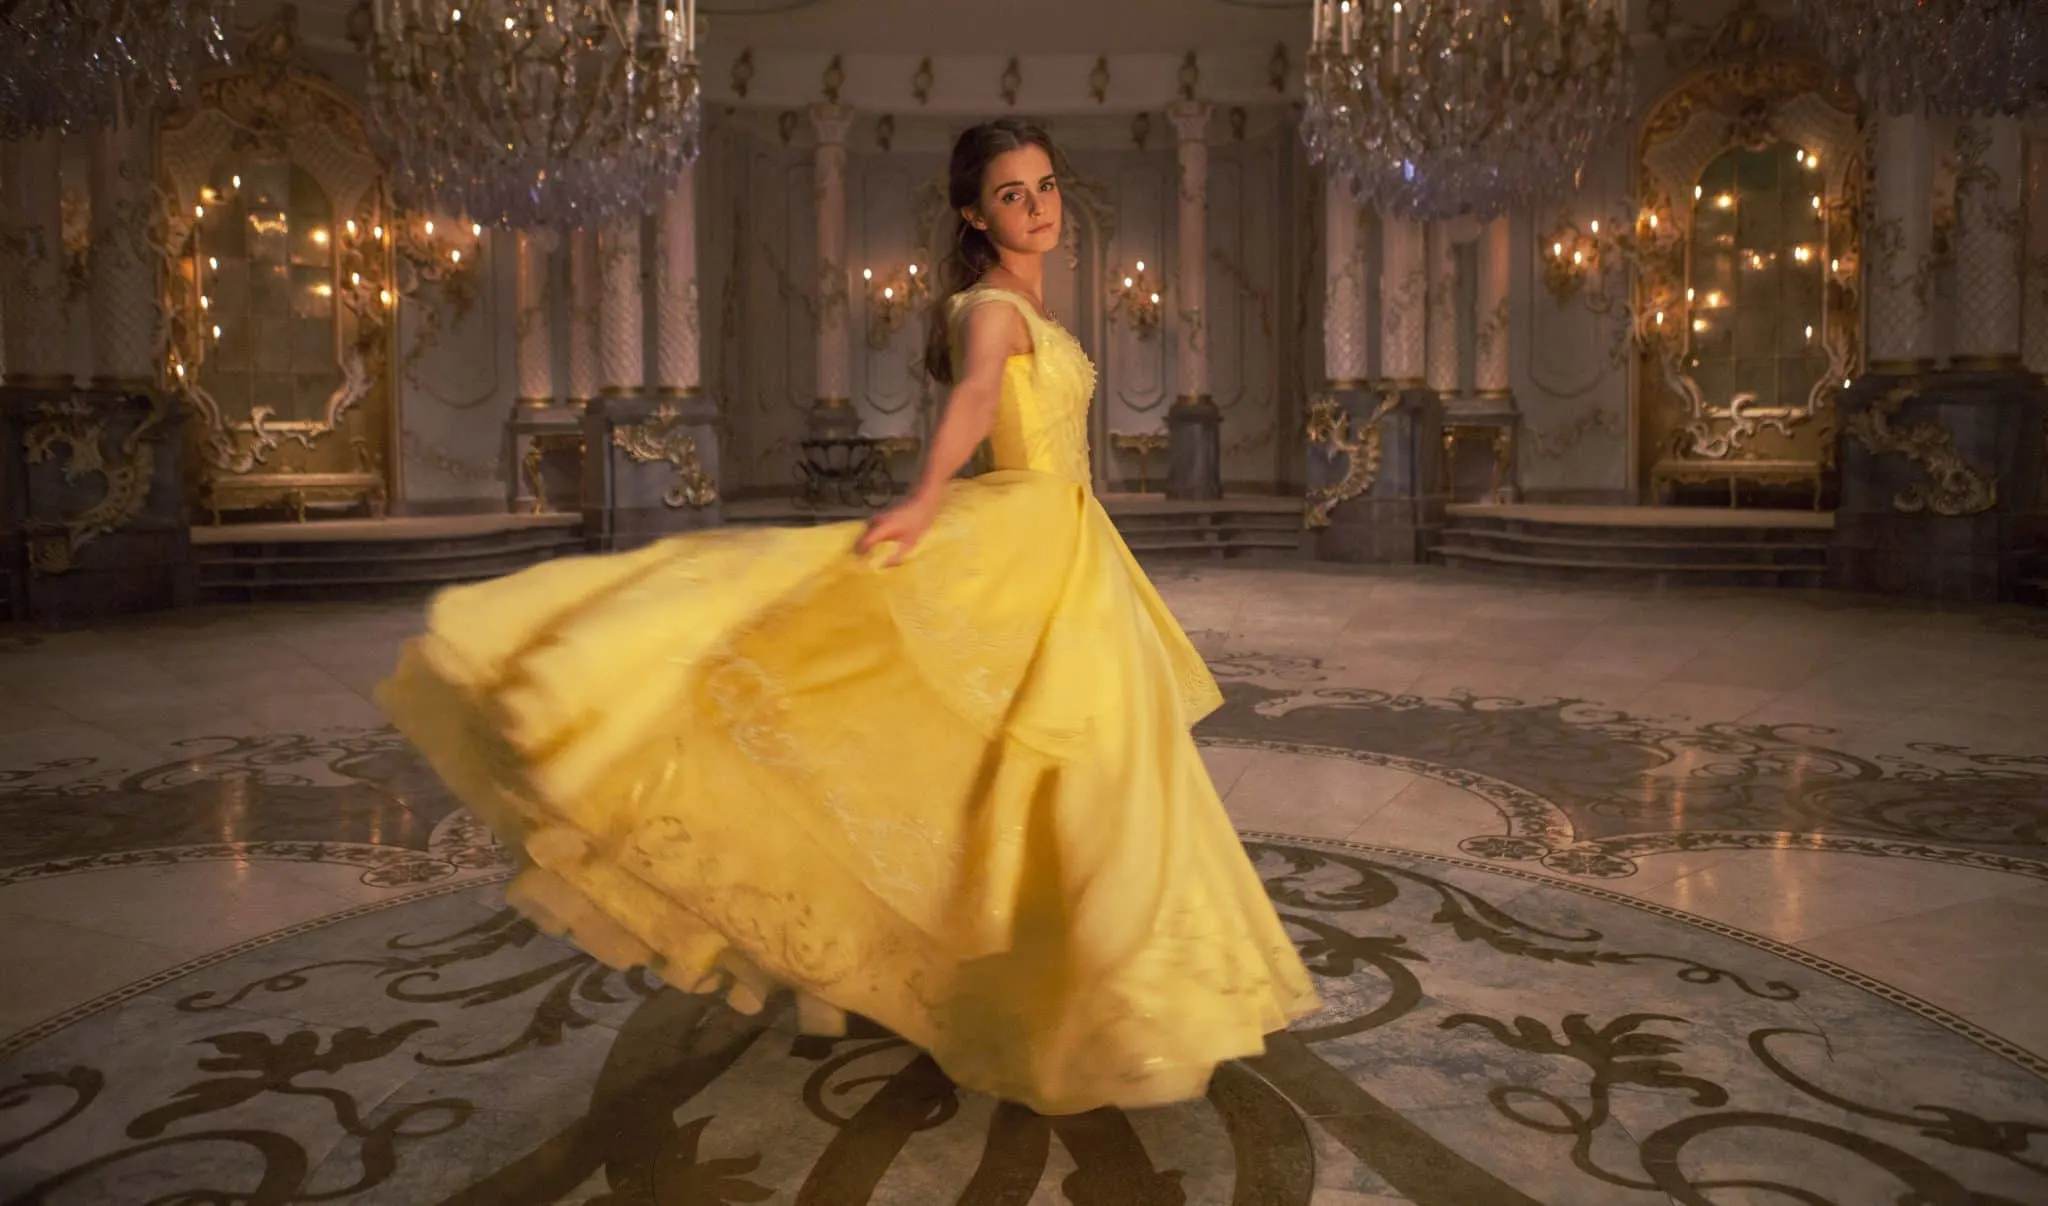 BEAUTY AND THE BEAST - Brand New Images From the Live-Action Film Now Available!!!